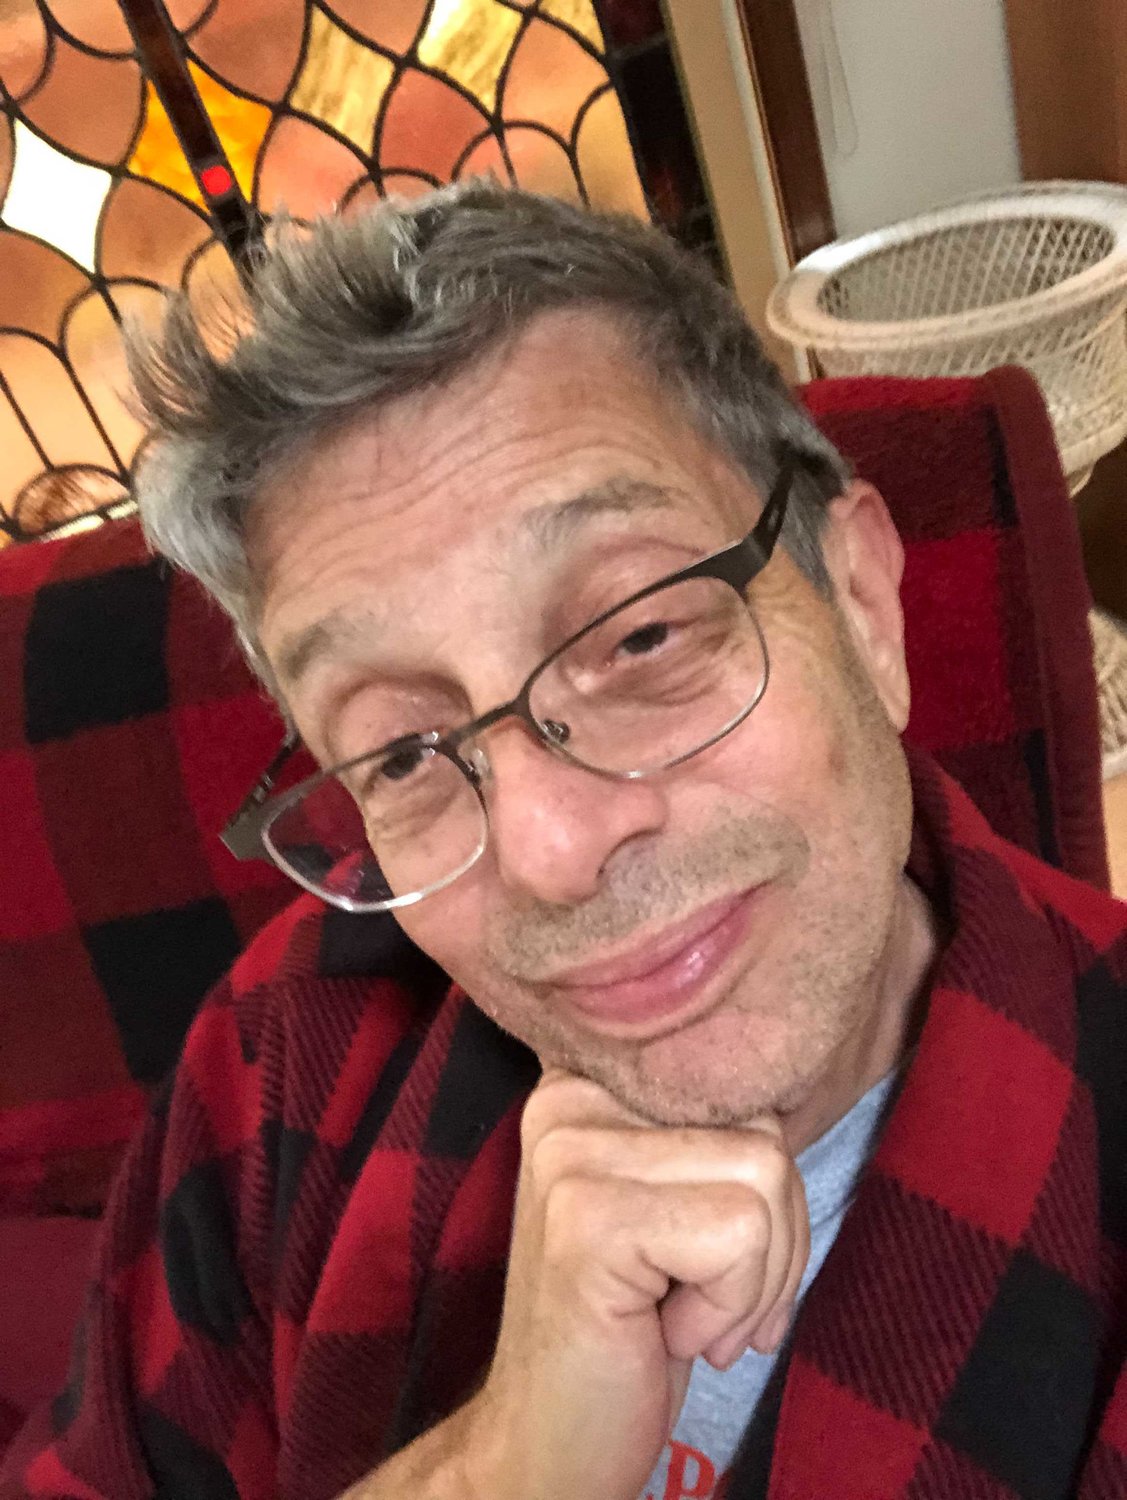 At the end of 2019, I wanted to be more like Jeff Goldblum.